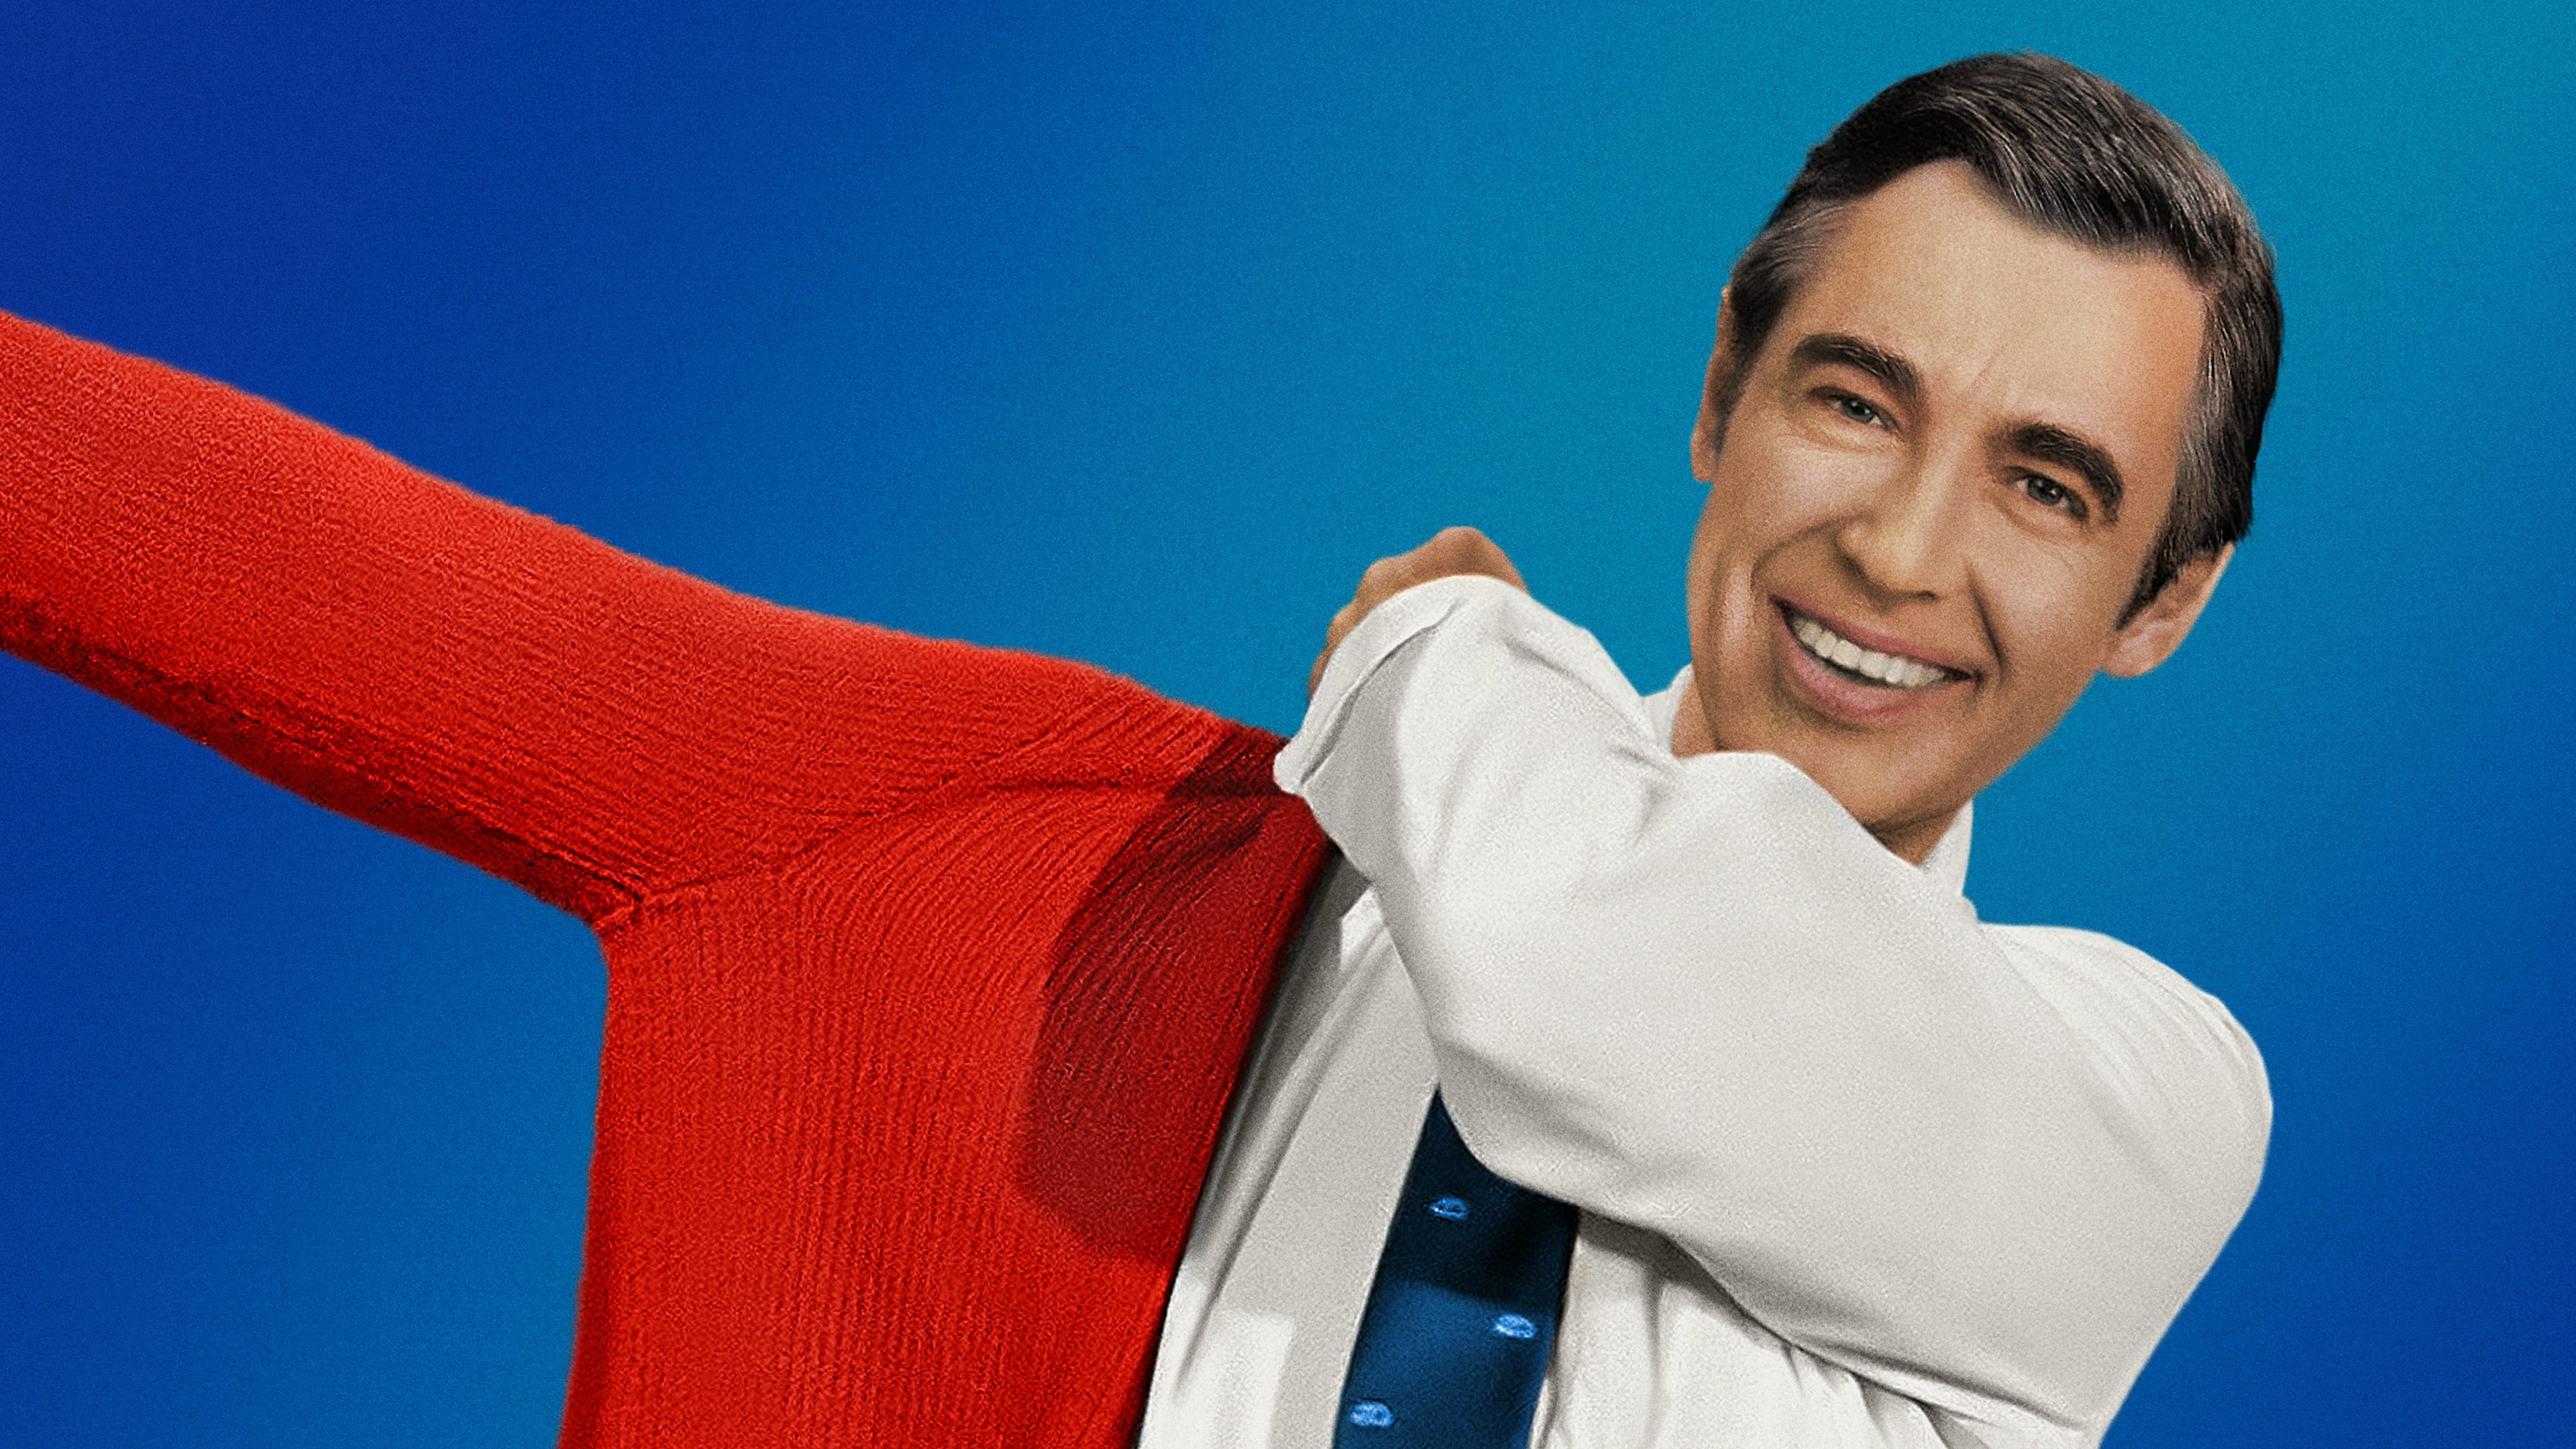 Won't You Be My Neighbor? streaming now on Netflix.